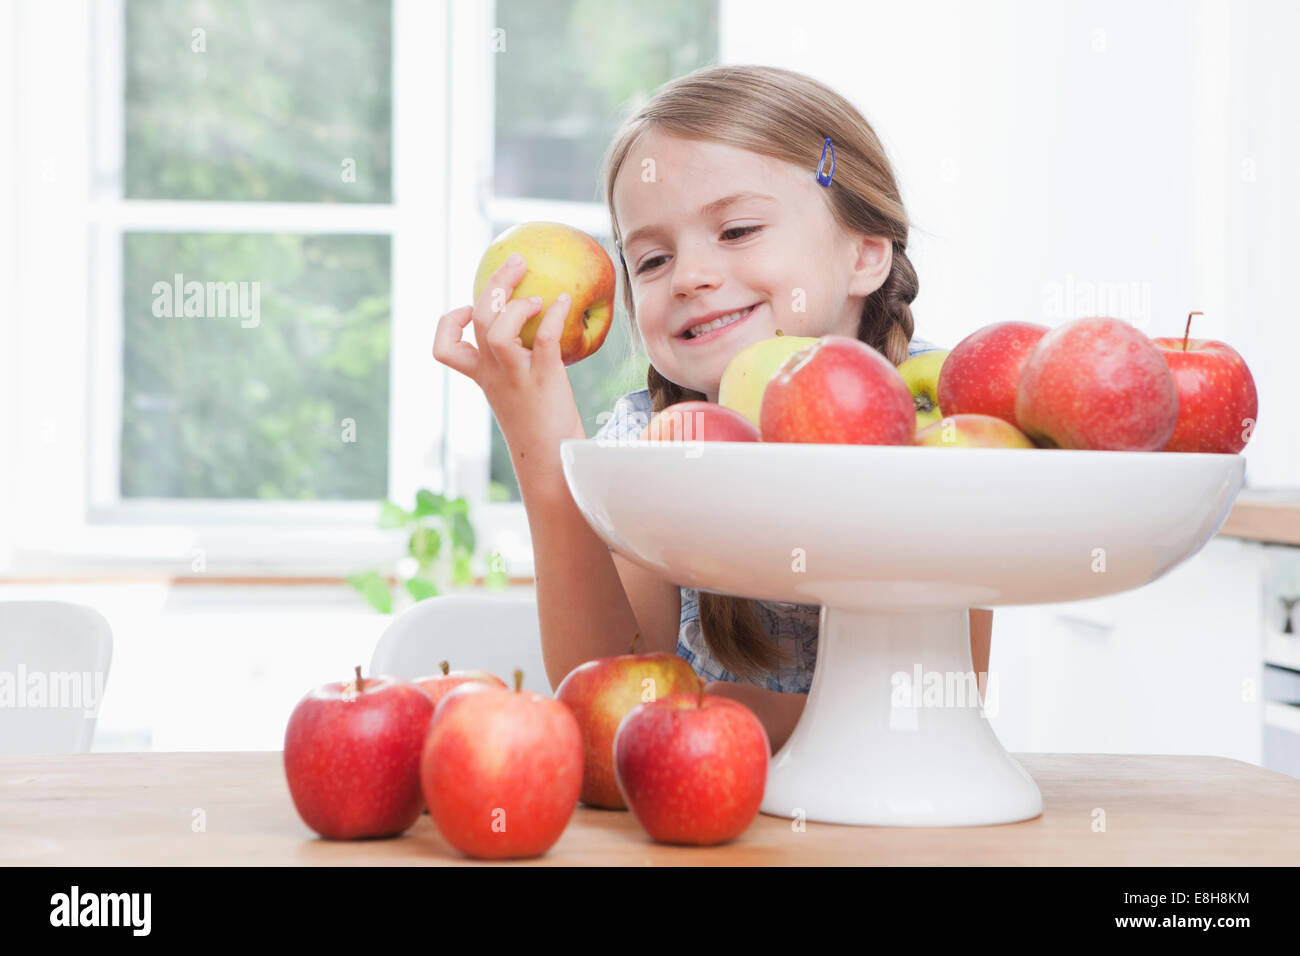 Germany, Munich, Girl (6-7) taking apple from bowl Stock Photo